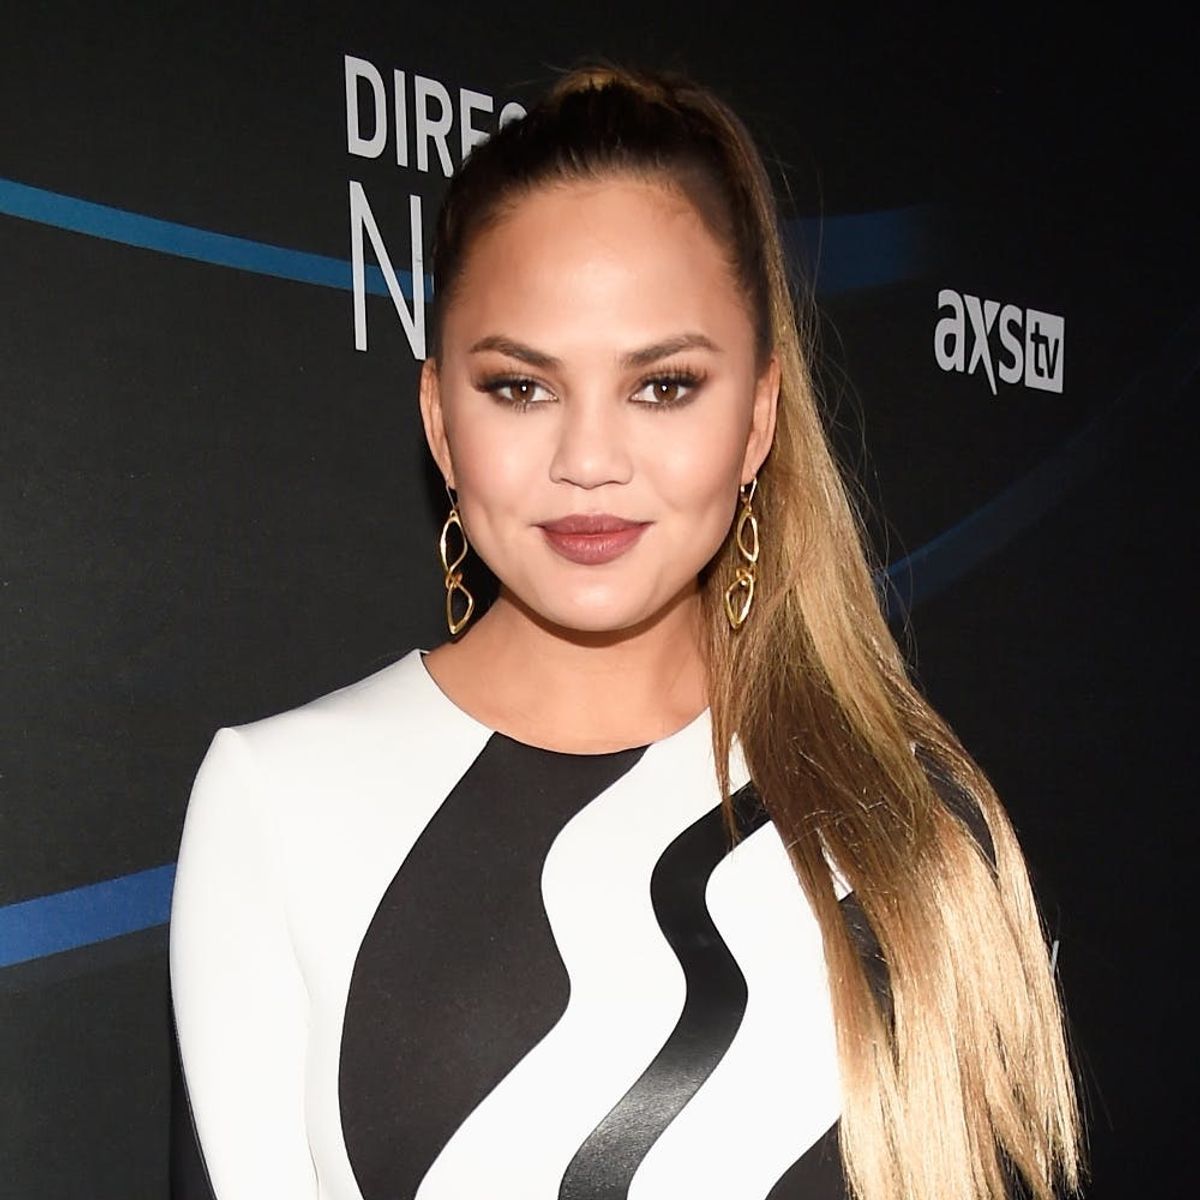 Here’s What We Know About Chrissy Teigen’s Hit-and-Run Car Accident